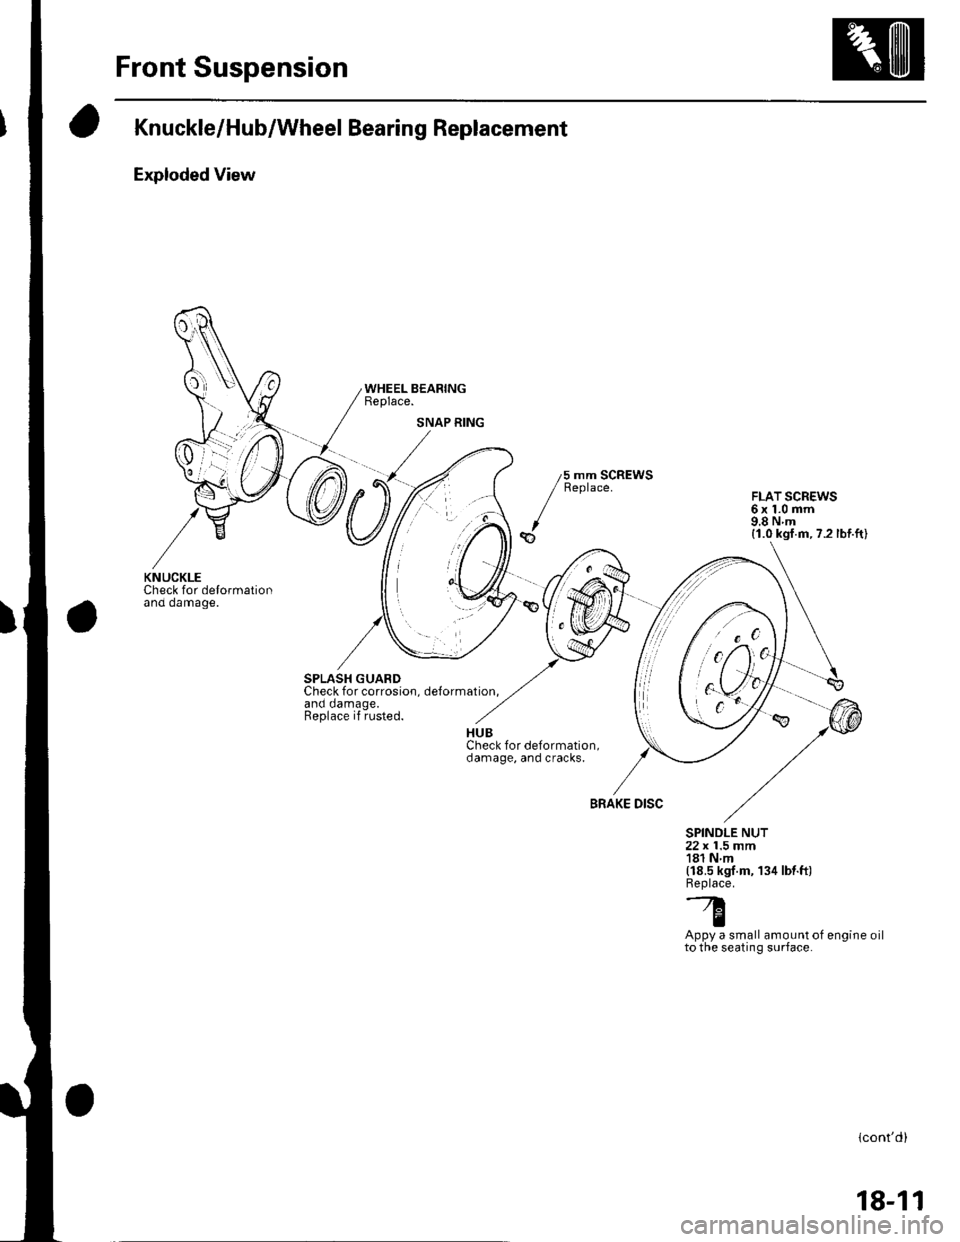 HONDA CIVIC 2002 7.G Service Manual Front Suspension
Knuckle/Hub/Wheel Bearing Replacement
Exploded View
Check for delormationano oamage.
SPLASH GUARDCheck for corrosion. delormation.and damage.Replace if rusted.
WHEEL BEARINGReplace.
5